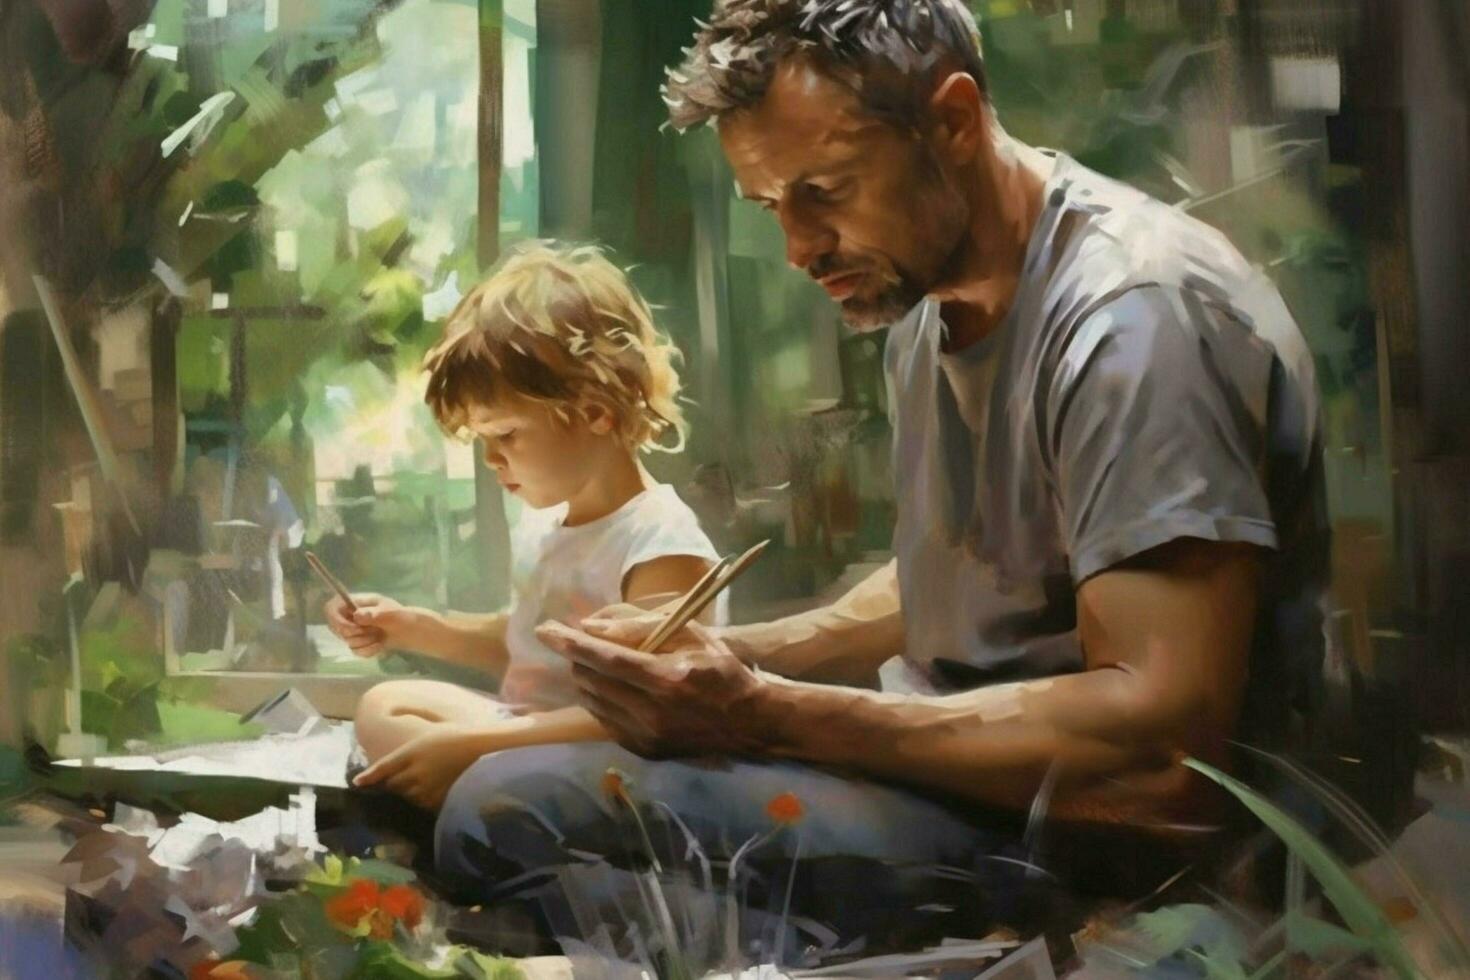 A father and child painting together photo